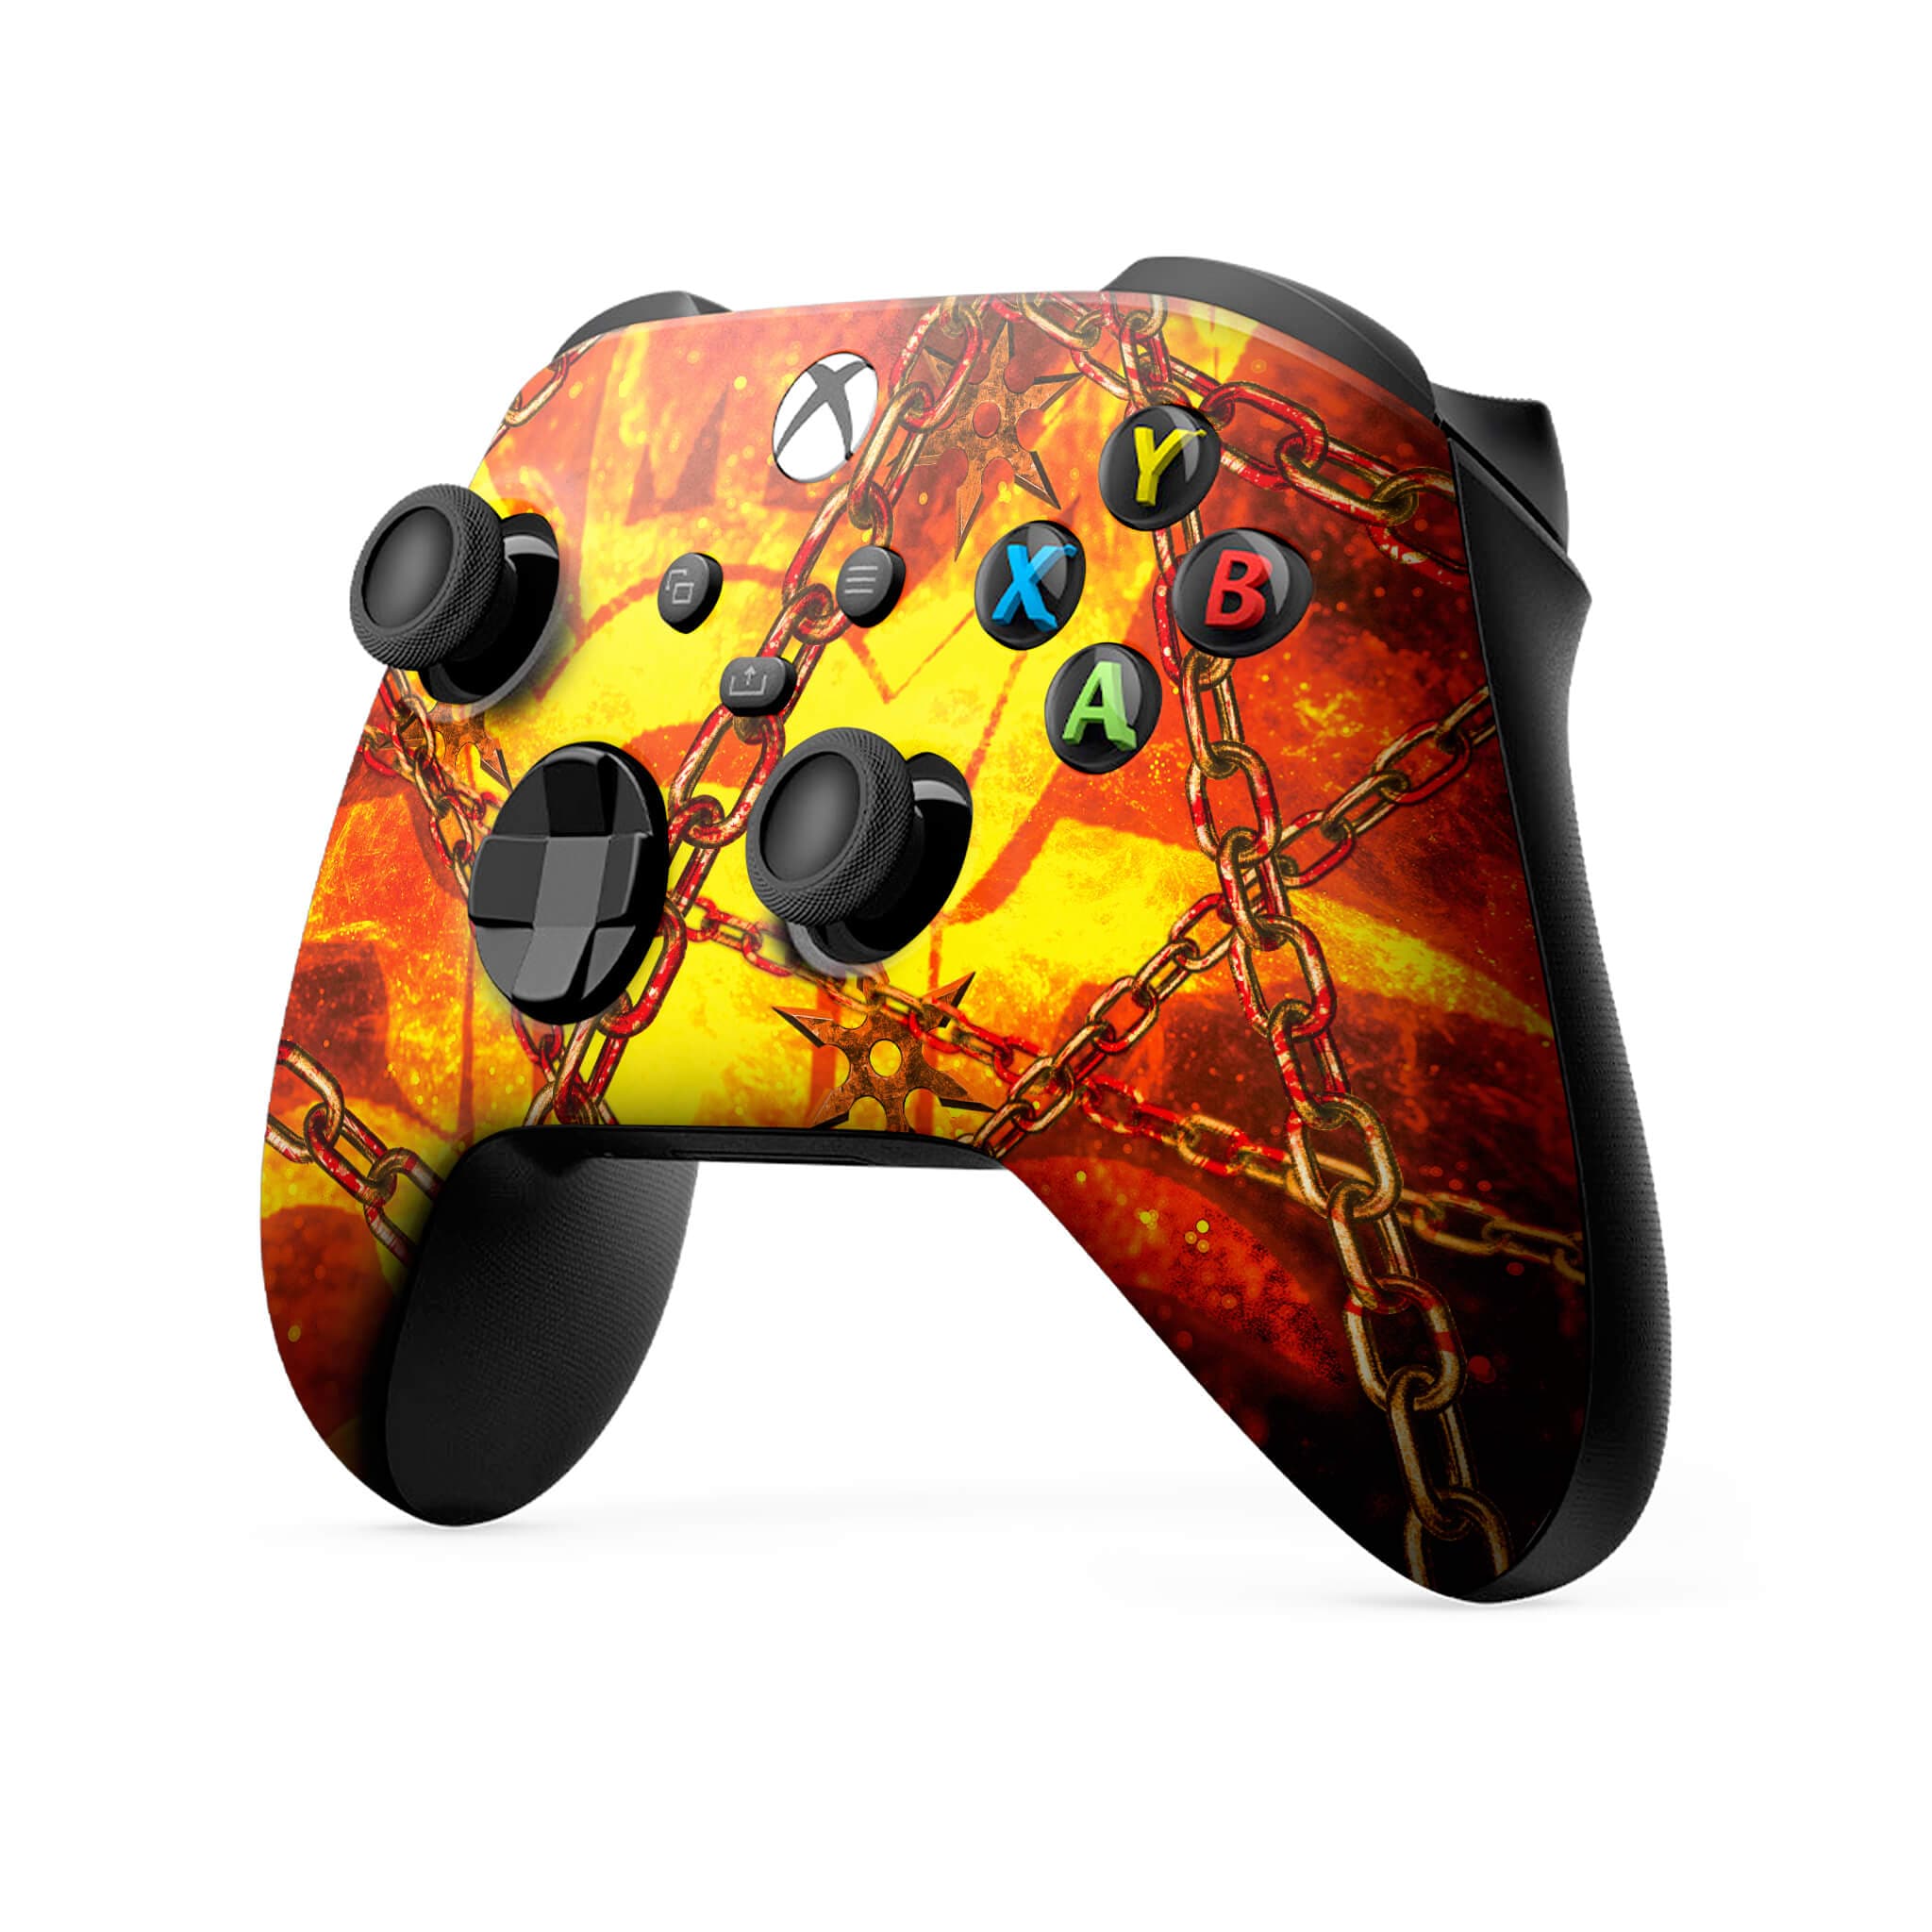 Hanzo Scorpion inspired x box series x controller with bullet buttons